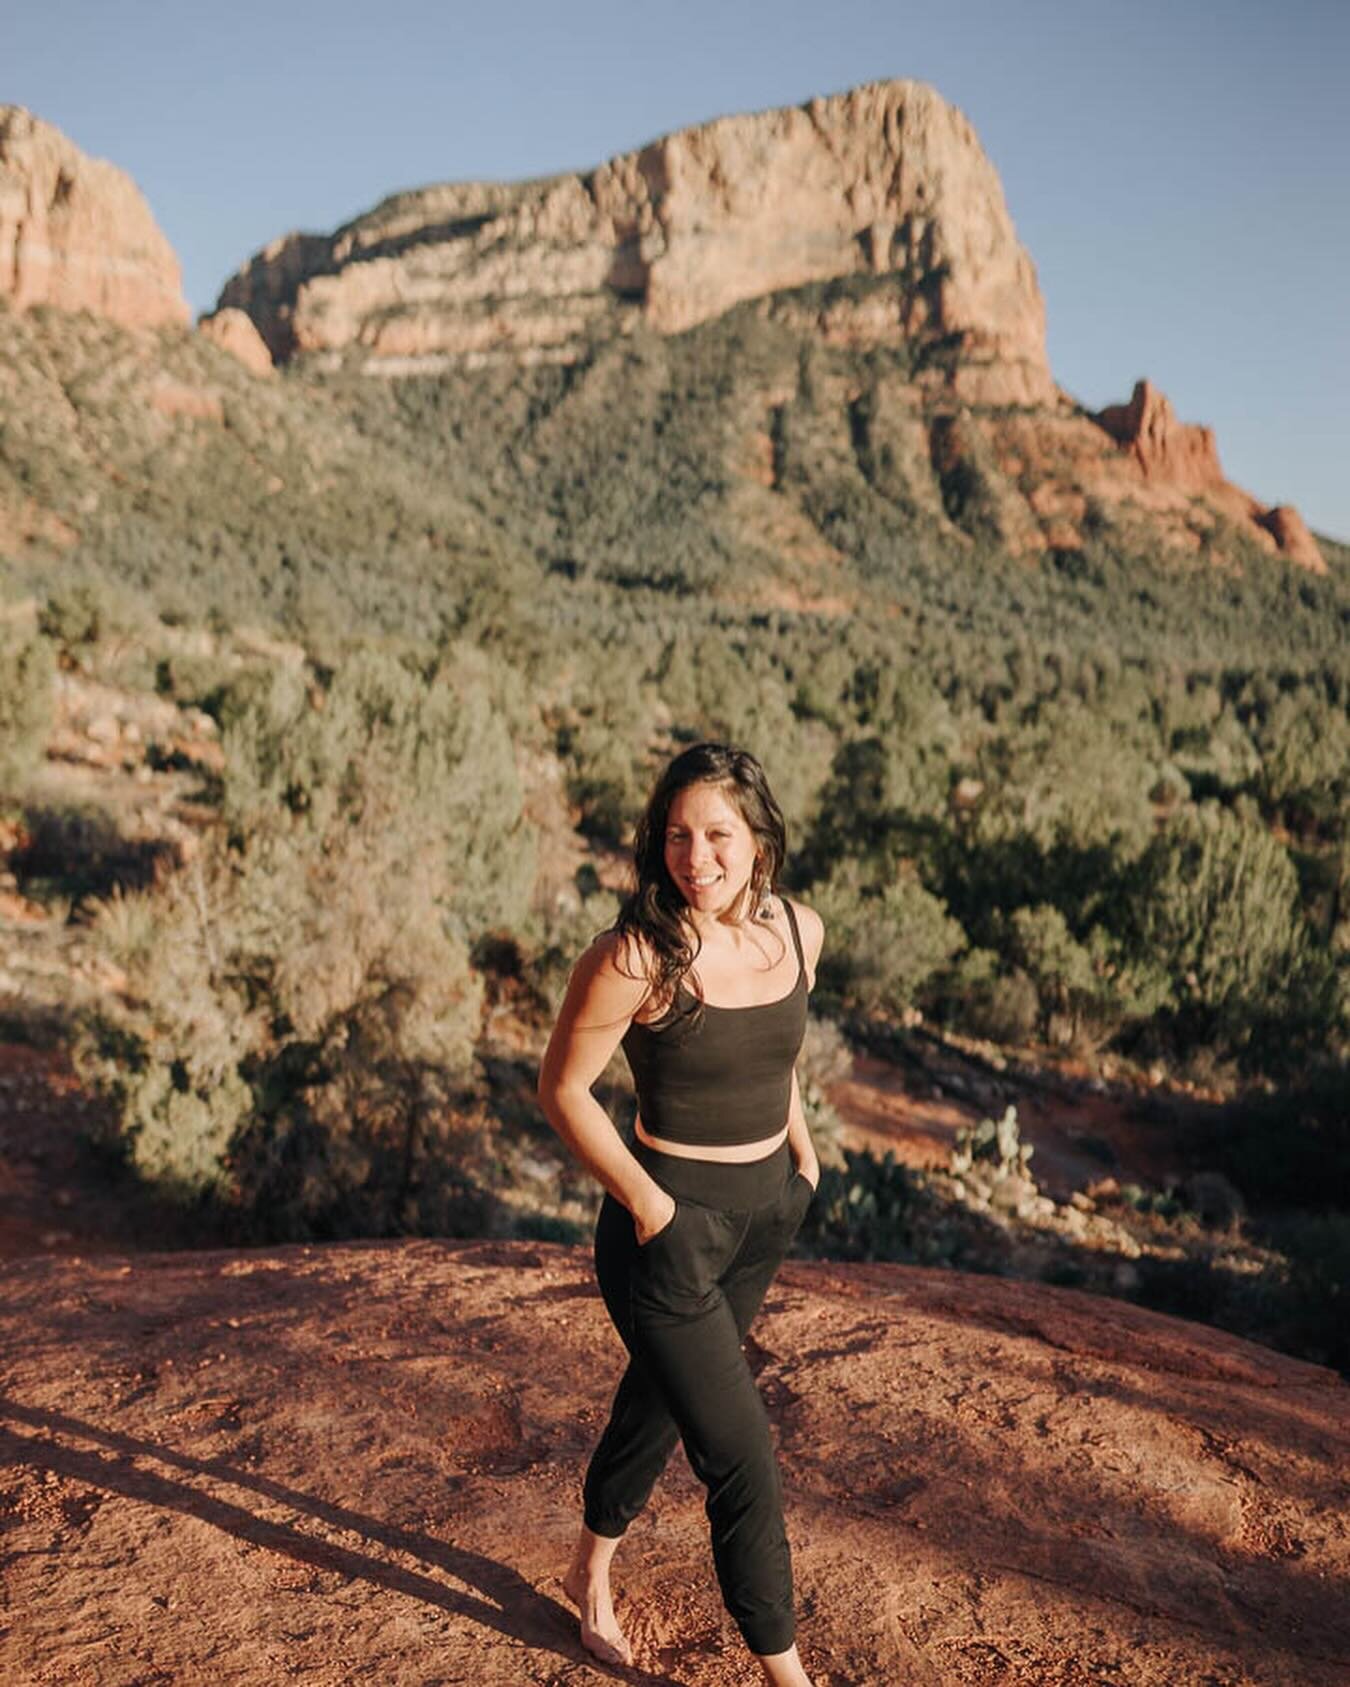 Ya&rsquo;ll counting down the days to @sedonayogafestival March 14-17!! 🏜️

For any spontaneous beings who want to join the magick, gather in the red rock temples of Nature and tap into the power of collective practice&hellip; I&rsquo;ve got some di